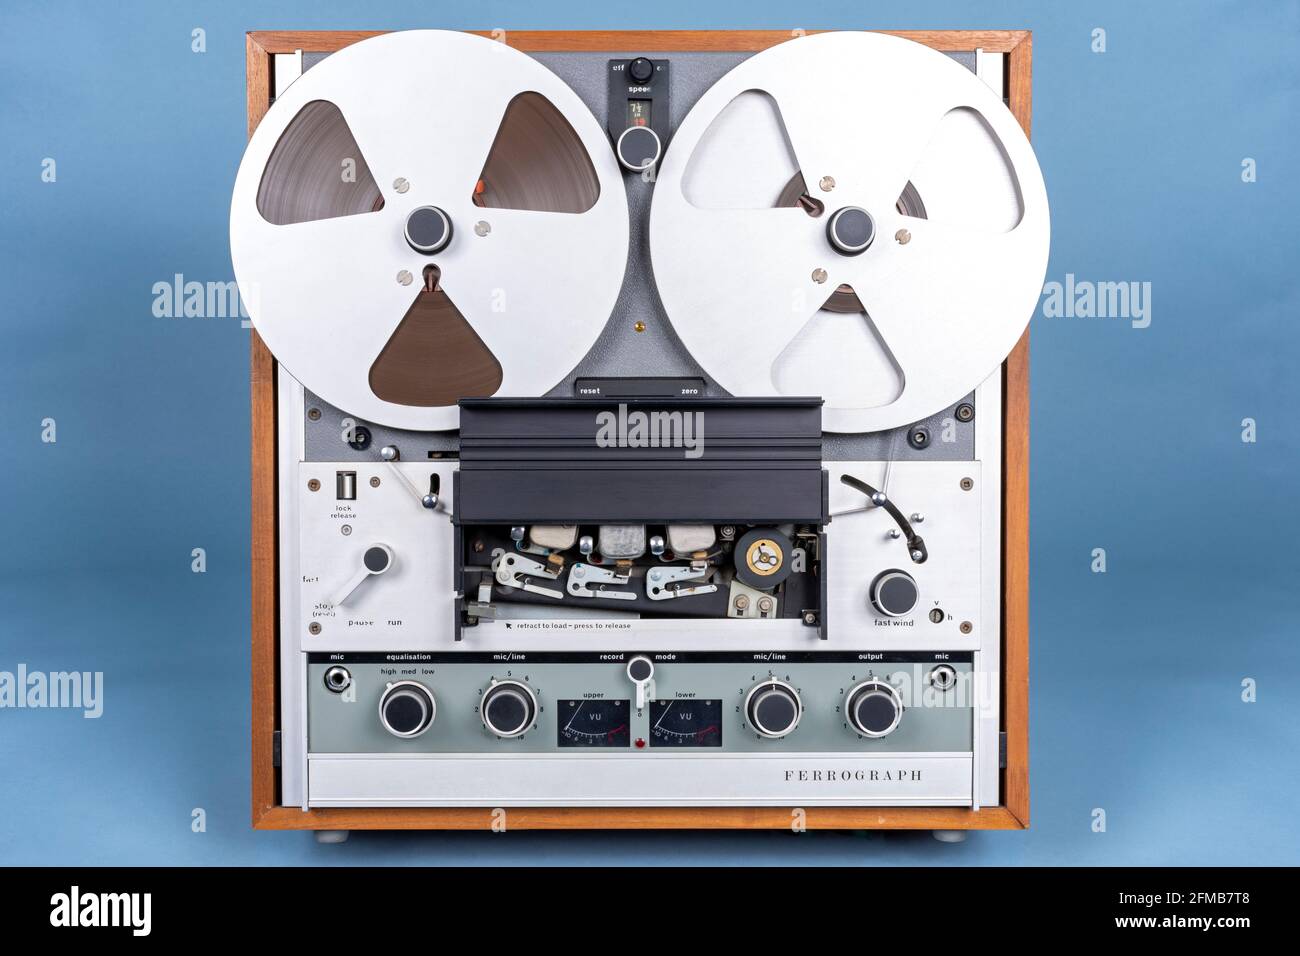 Ferrograph Series 7 reel-to-reel tape recorder.  Built late 1960s-early 1970s.  Shown with recording heads cover open. Stock Photo